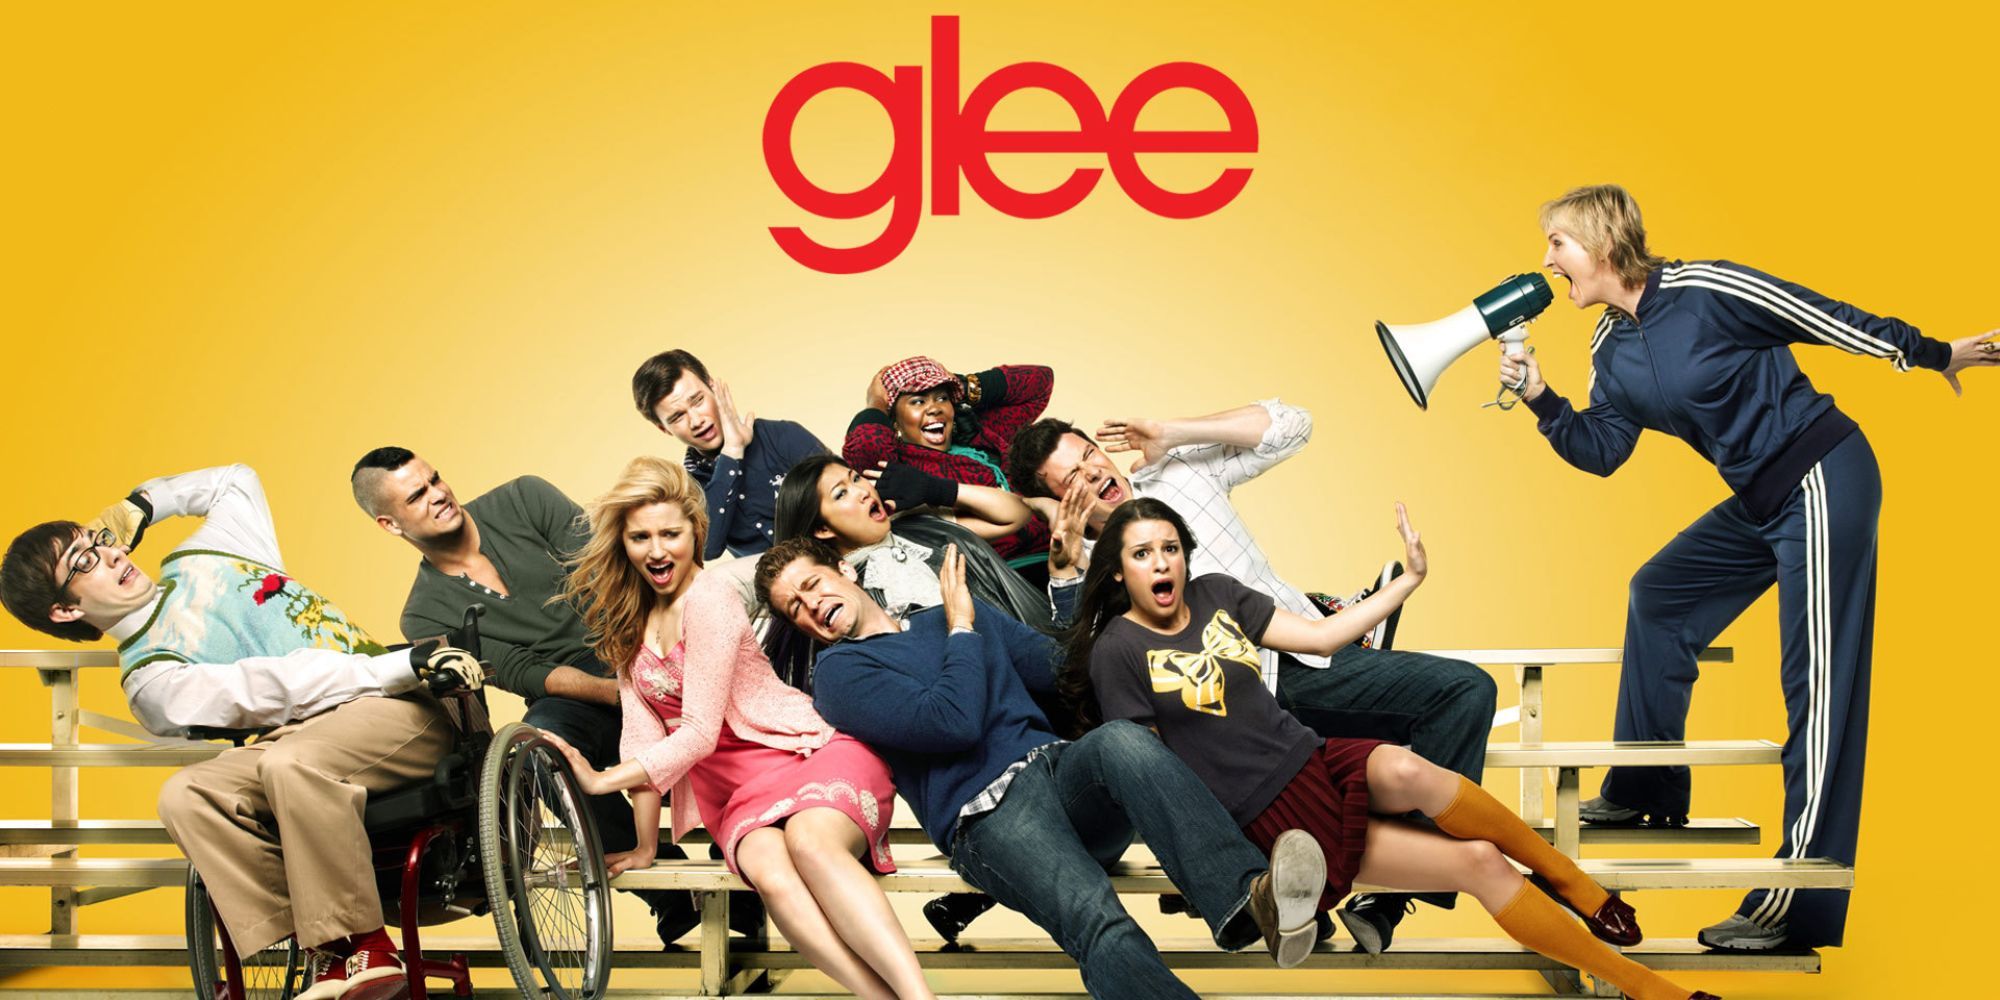 The poster of Glee